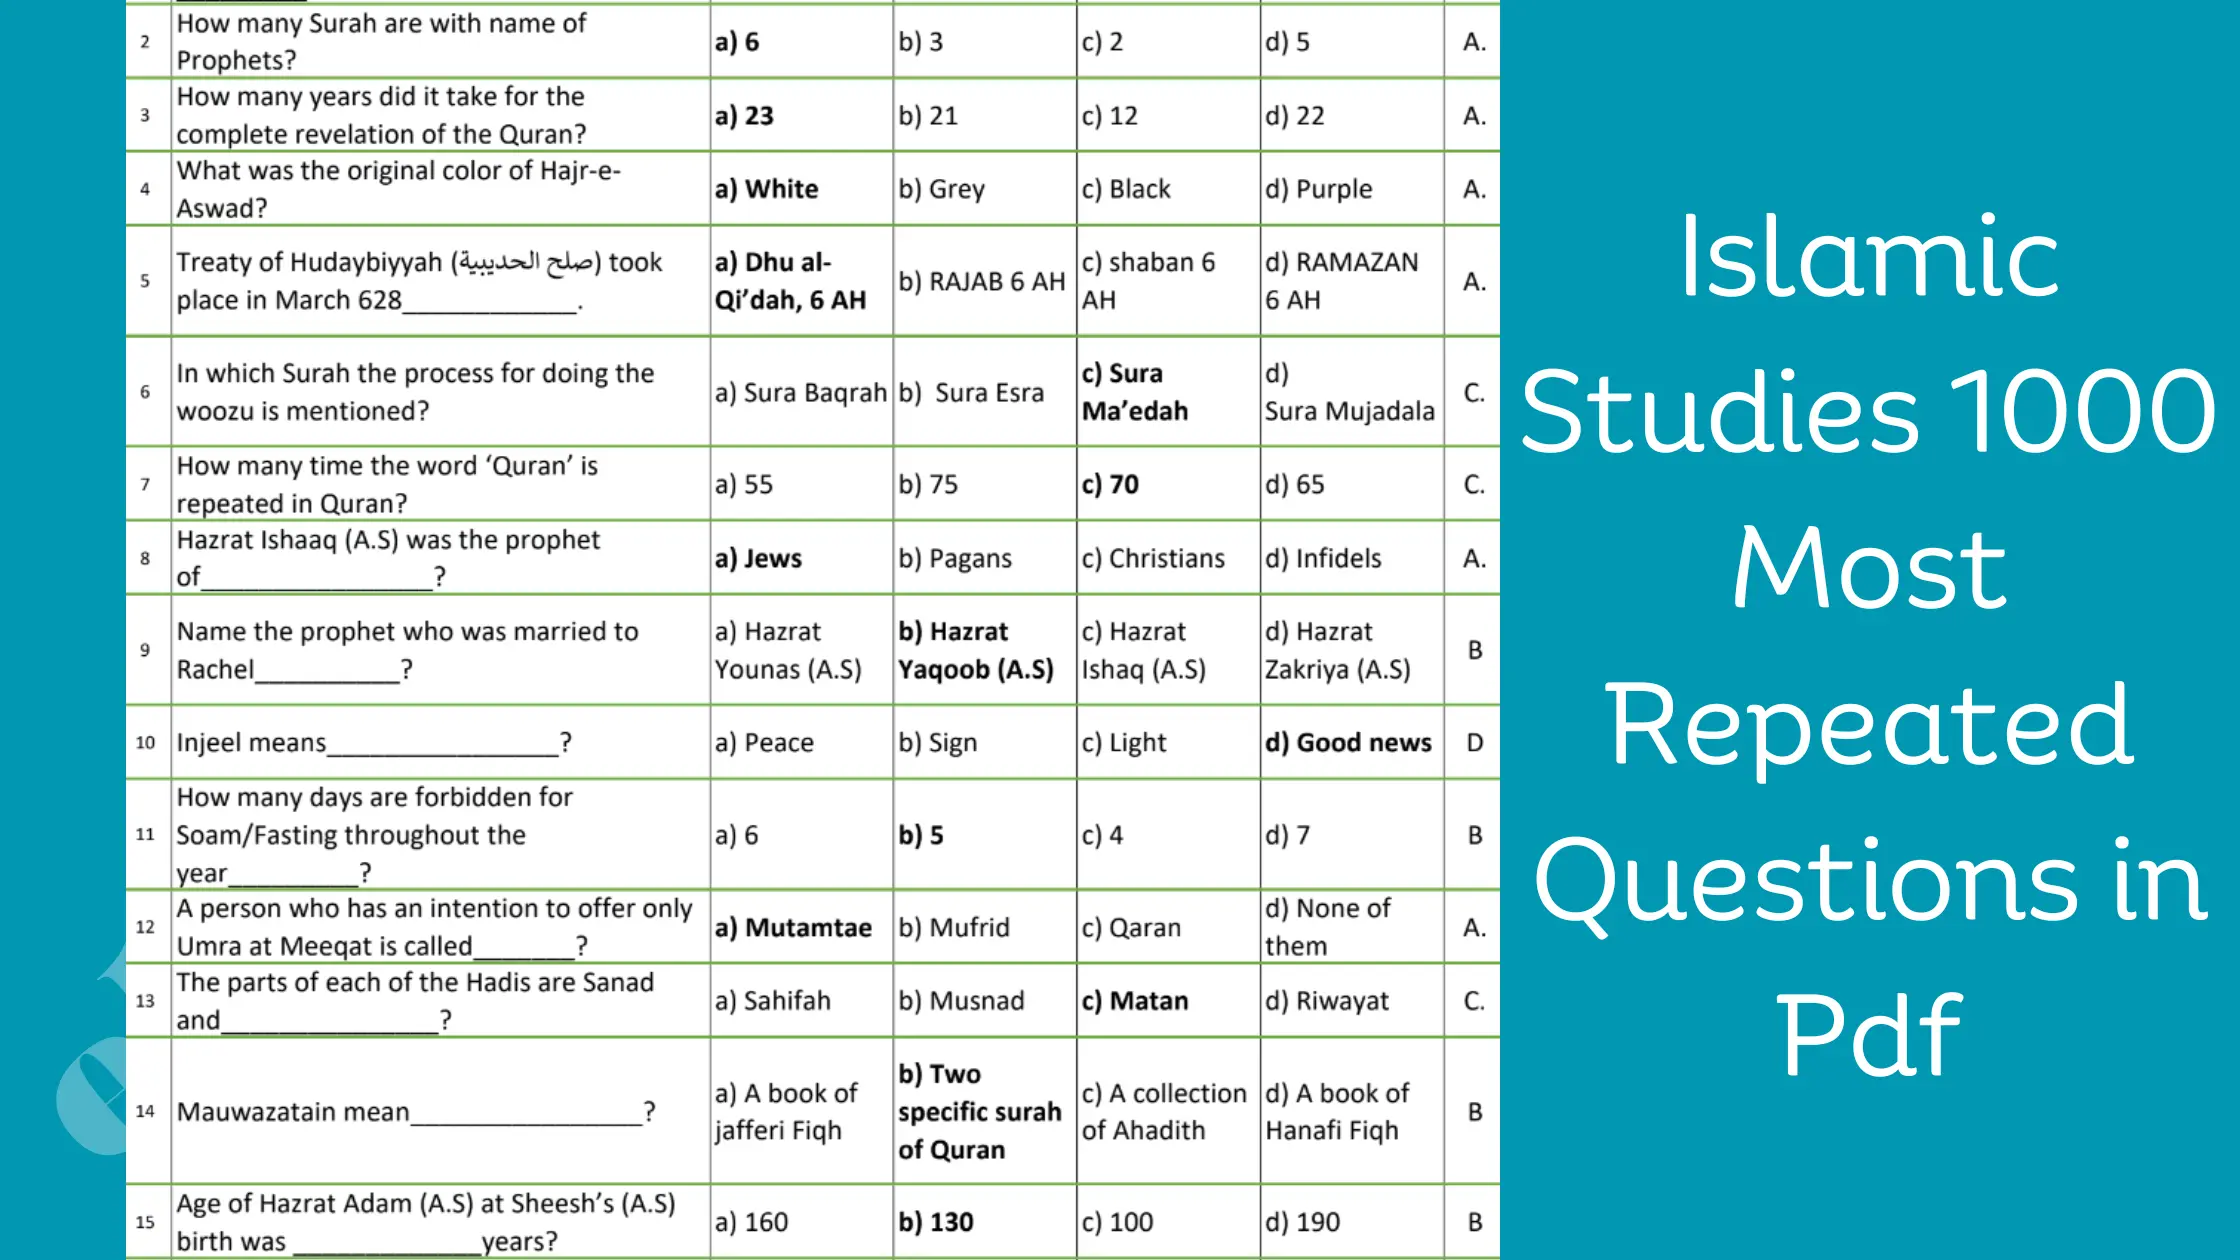 Islamic Studies 1000 Most Repeated Questions